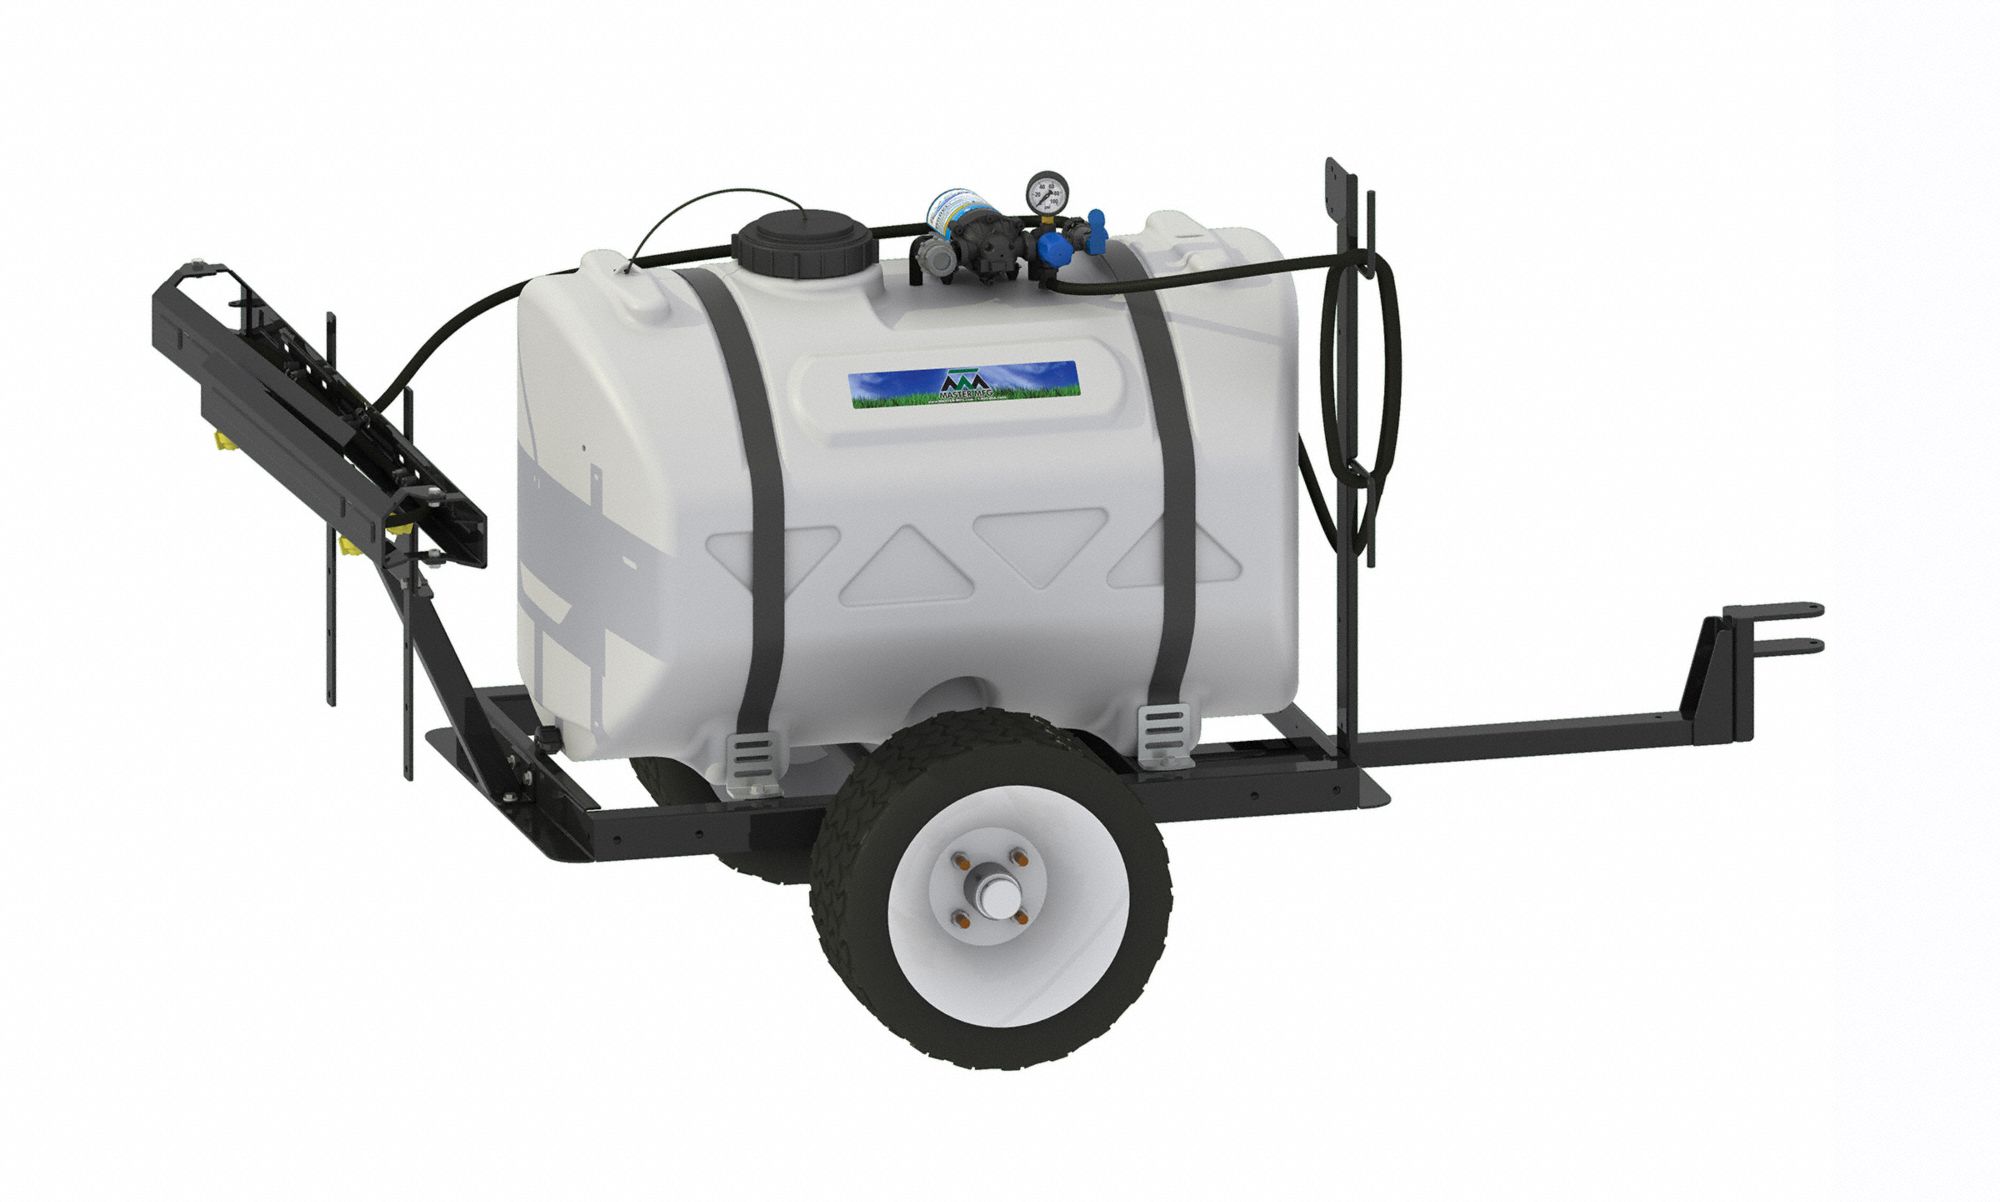 Deluxe Trailer Sprayer: 60 gal Tank Capacity, 2.2 gpm Flow Rate, 60 psi